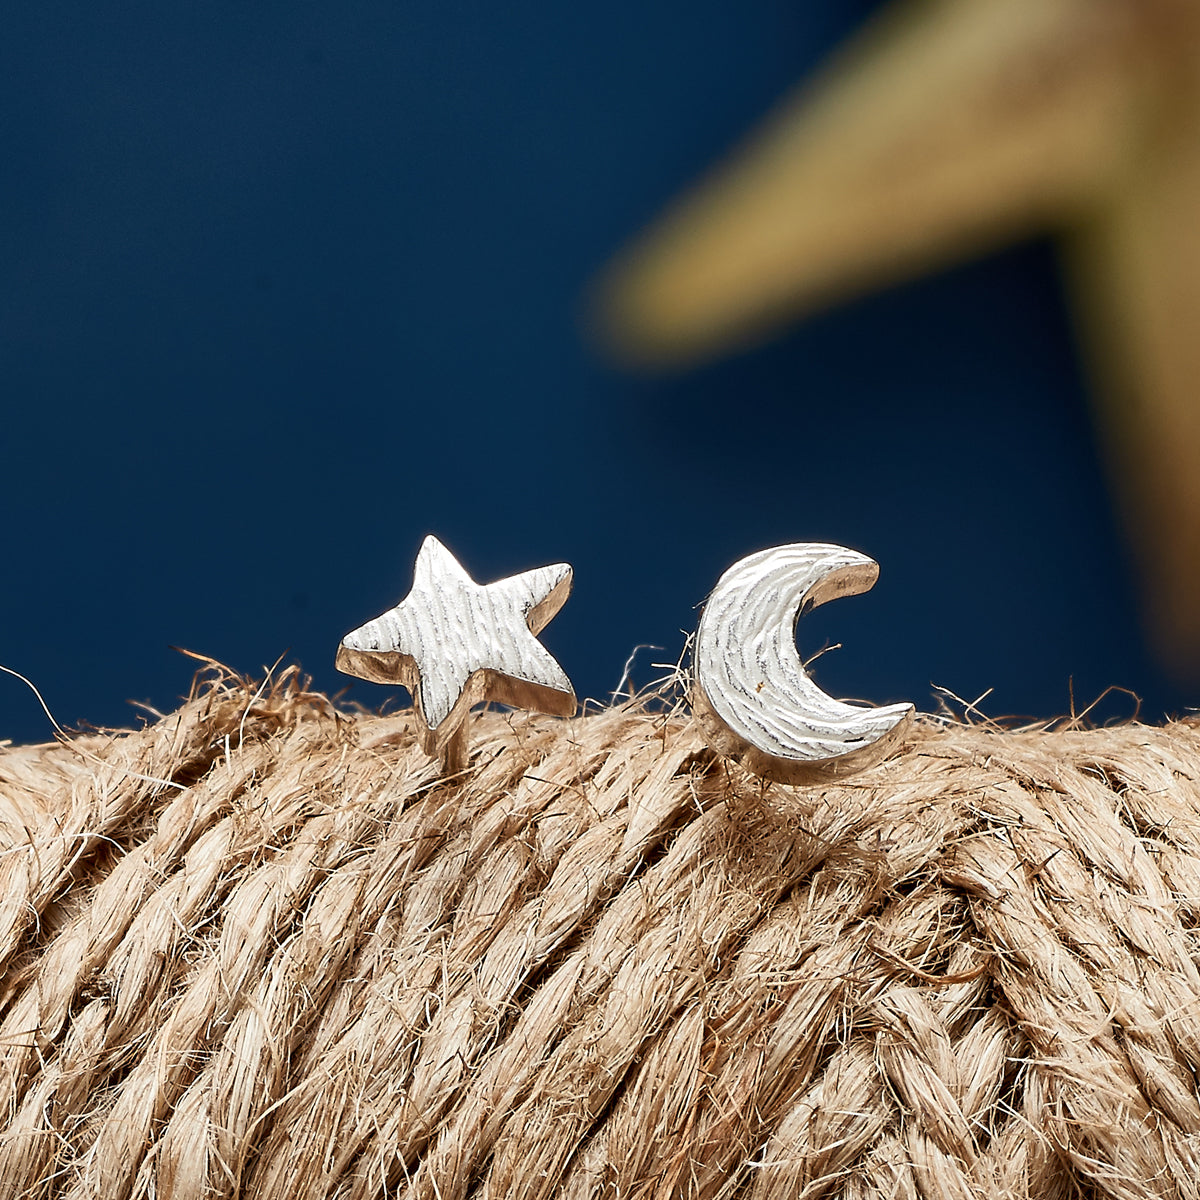 Solid 925 sterling silver mismatched moon and star stud earrings designer Scarlett Jewellery